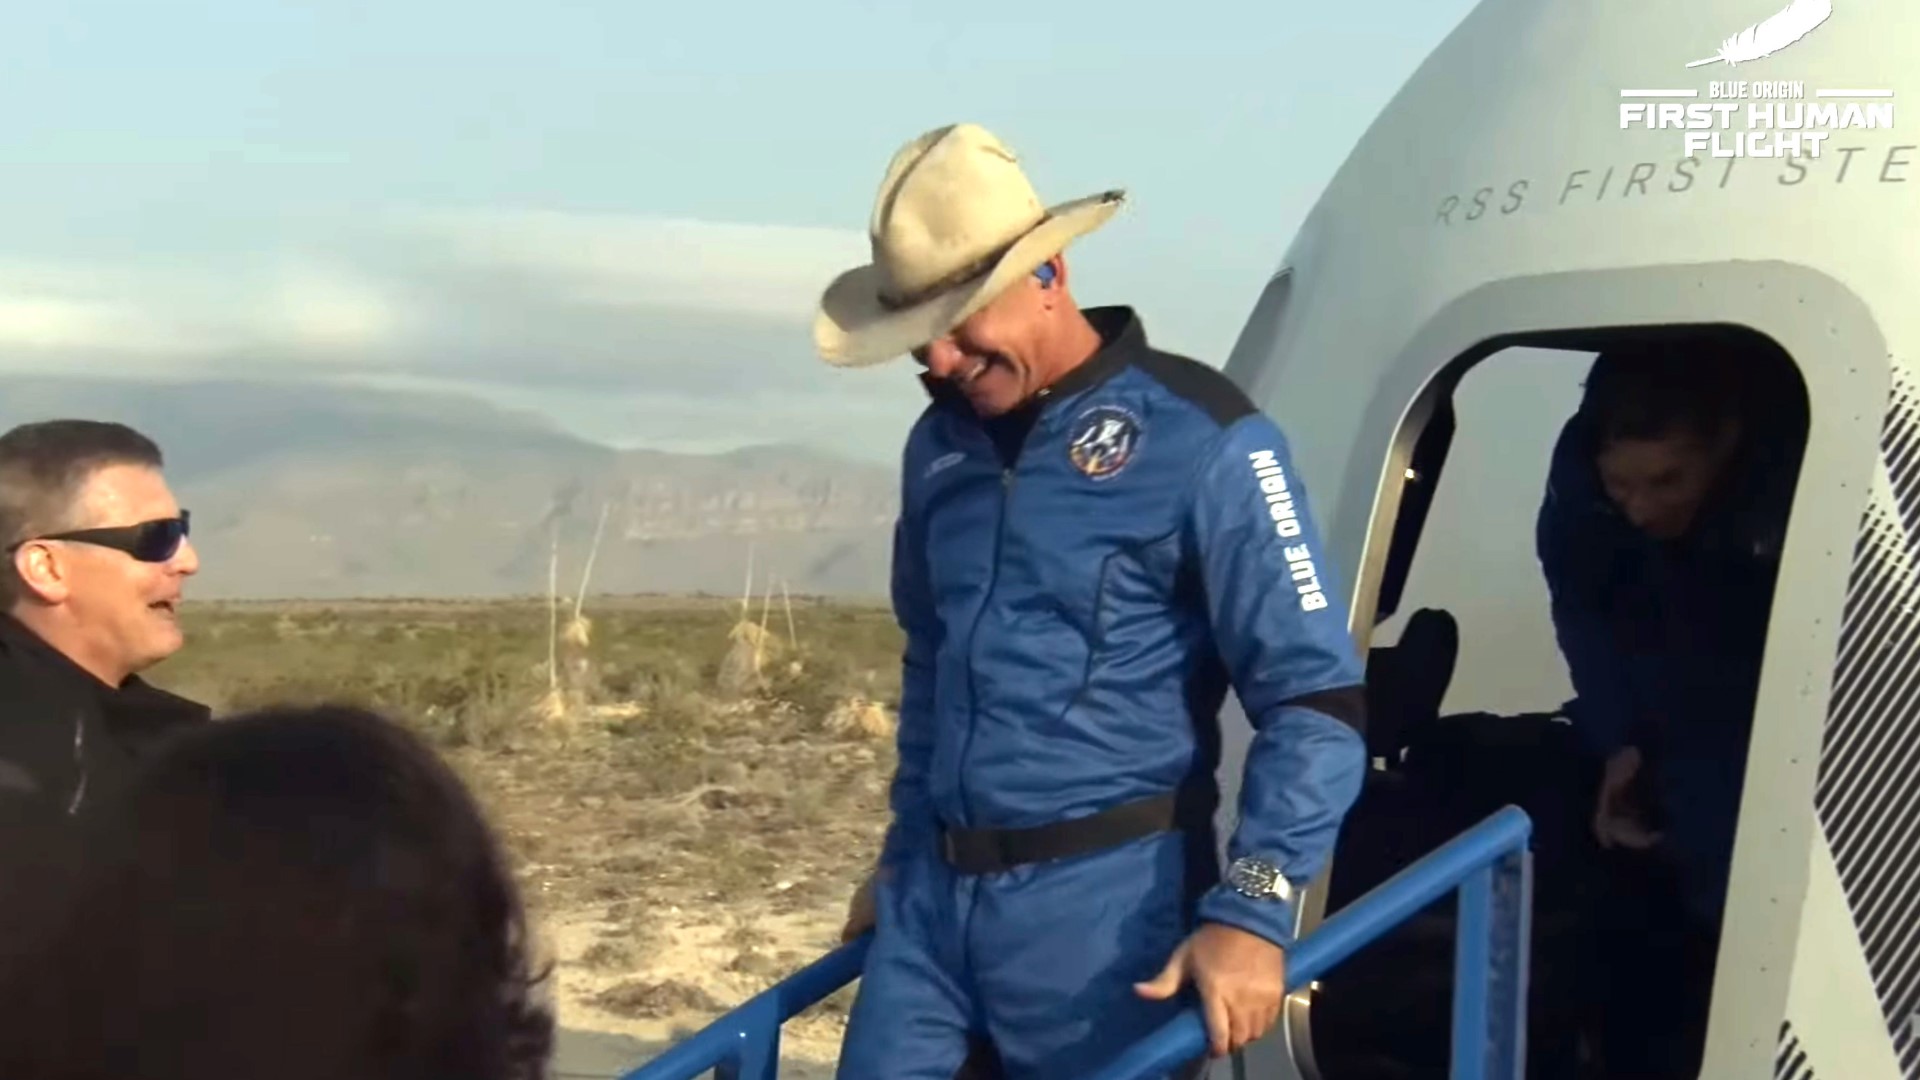 The Amazon founder soared to space with a hand-picked group in his Blue Origin capsule and landed 10 minutes later on the desert floor.